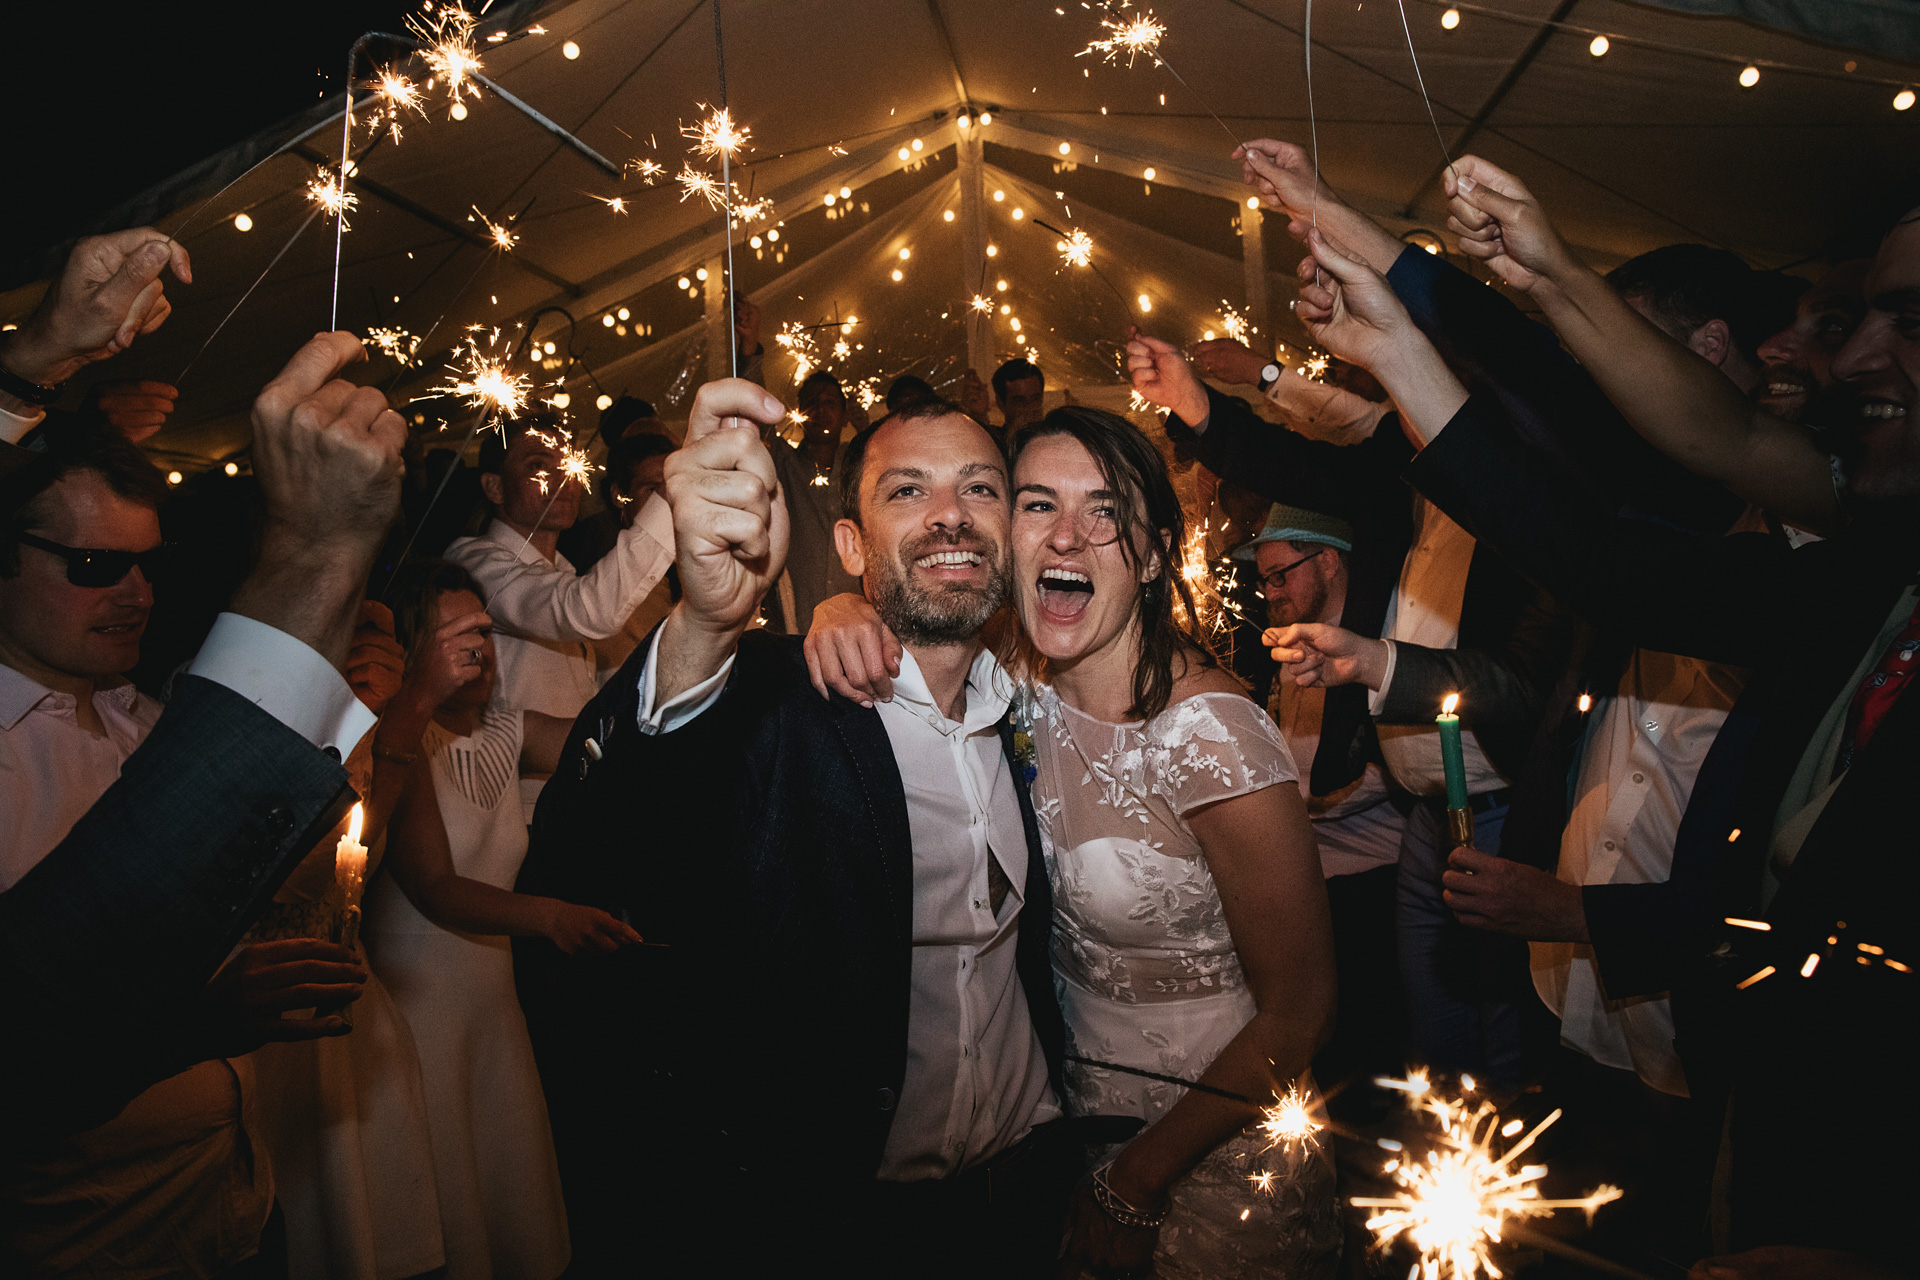 Bride and groom laughing surrounded by sparklers